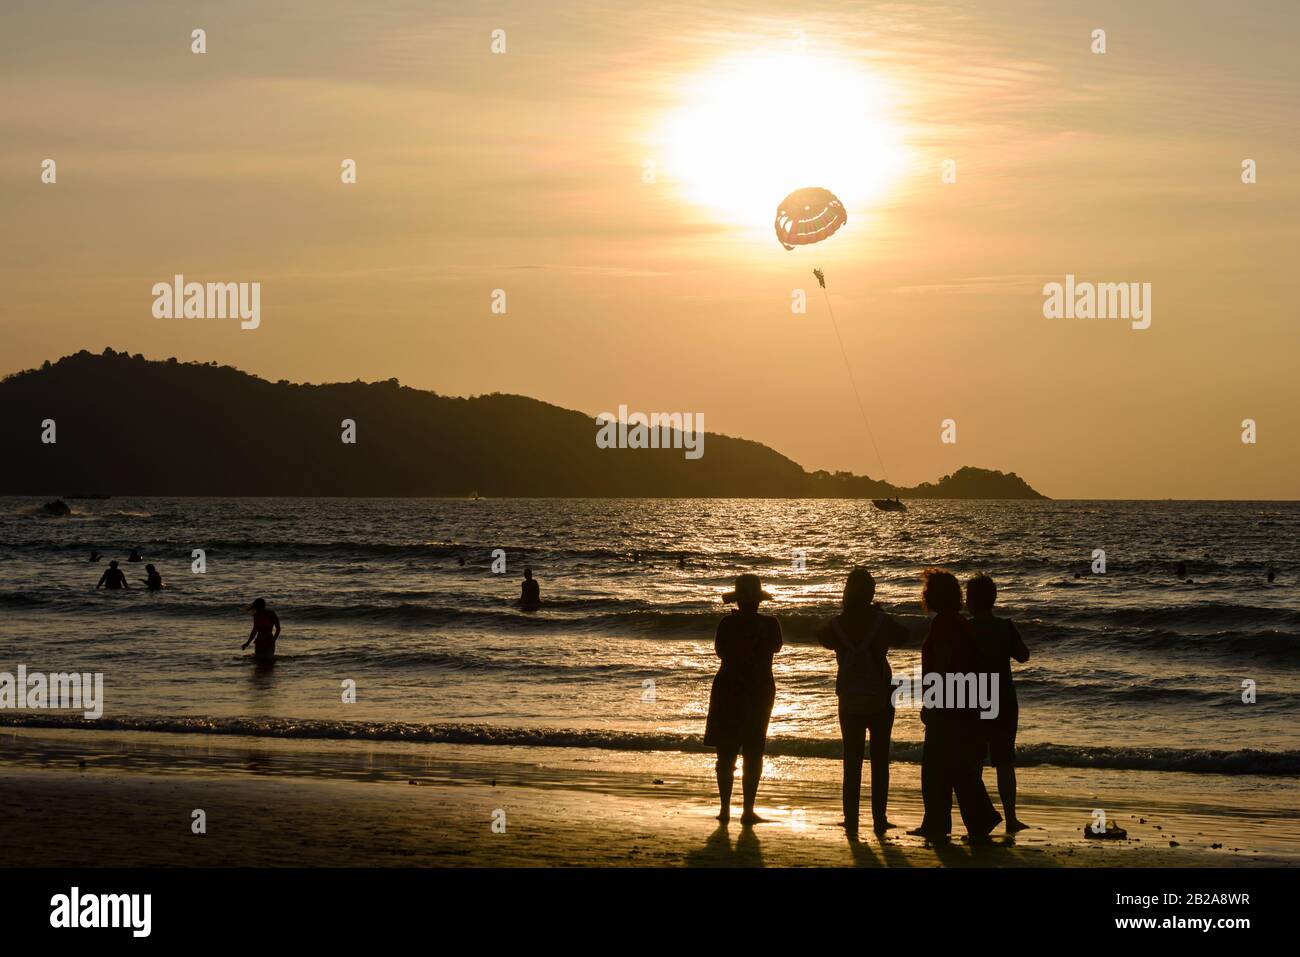 People on the beach at sunset, with a tourist parascending, at Patong Beach, Phuket, Thailand Stock Photo